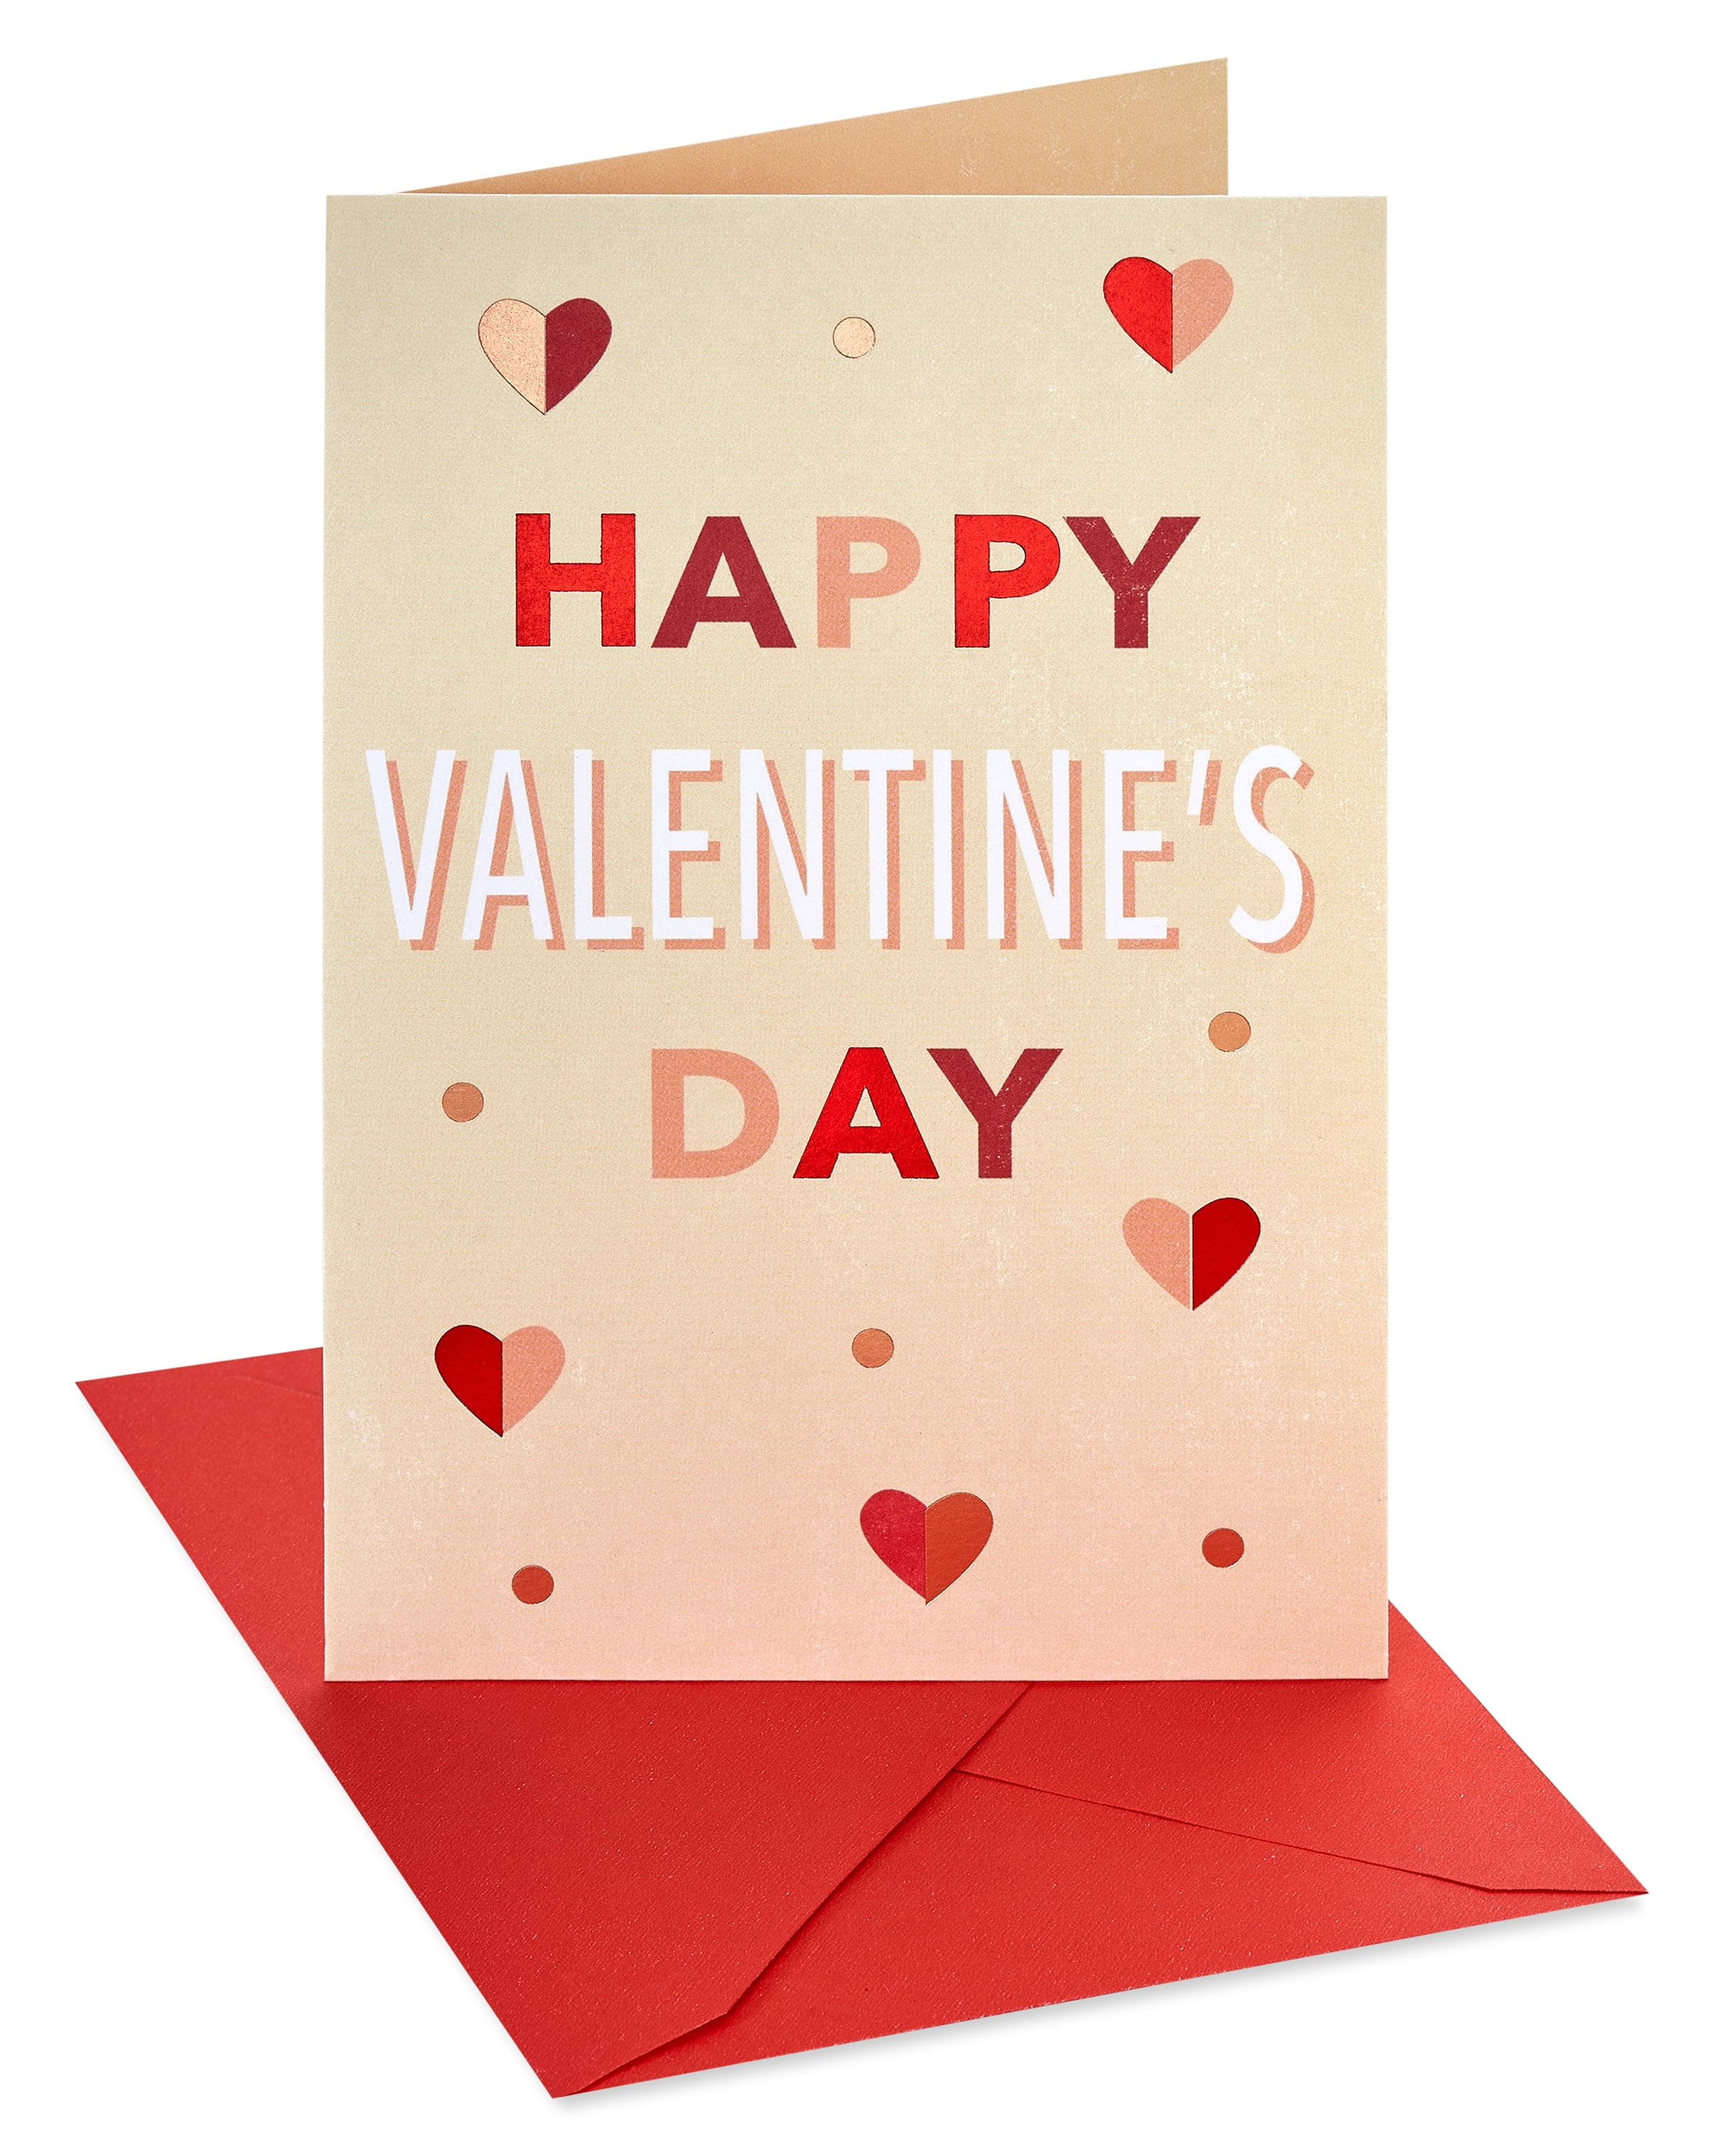 American Greetings Valentine's Day Card (Happy Valentine's Day)